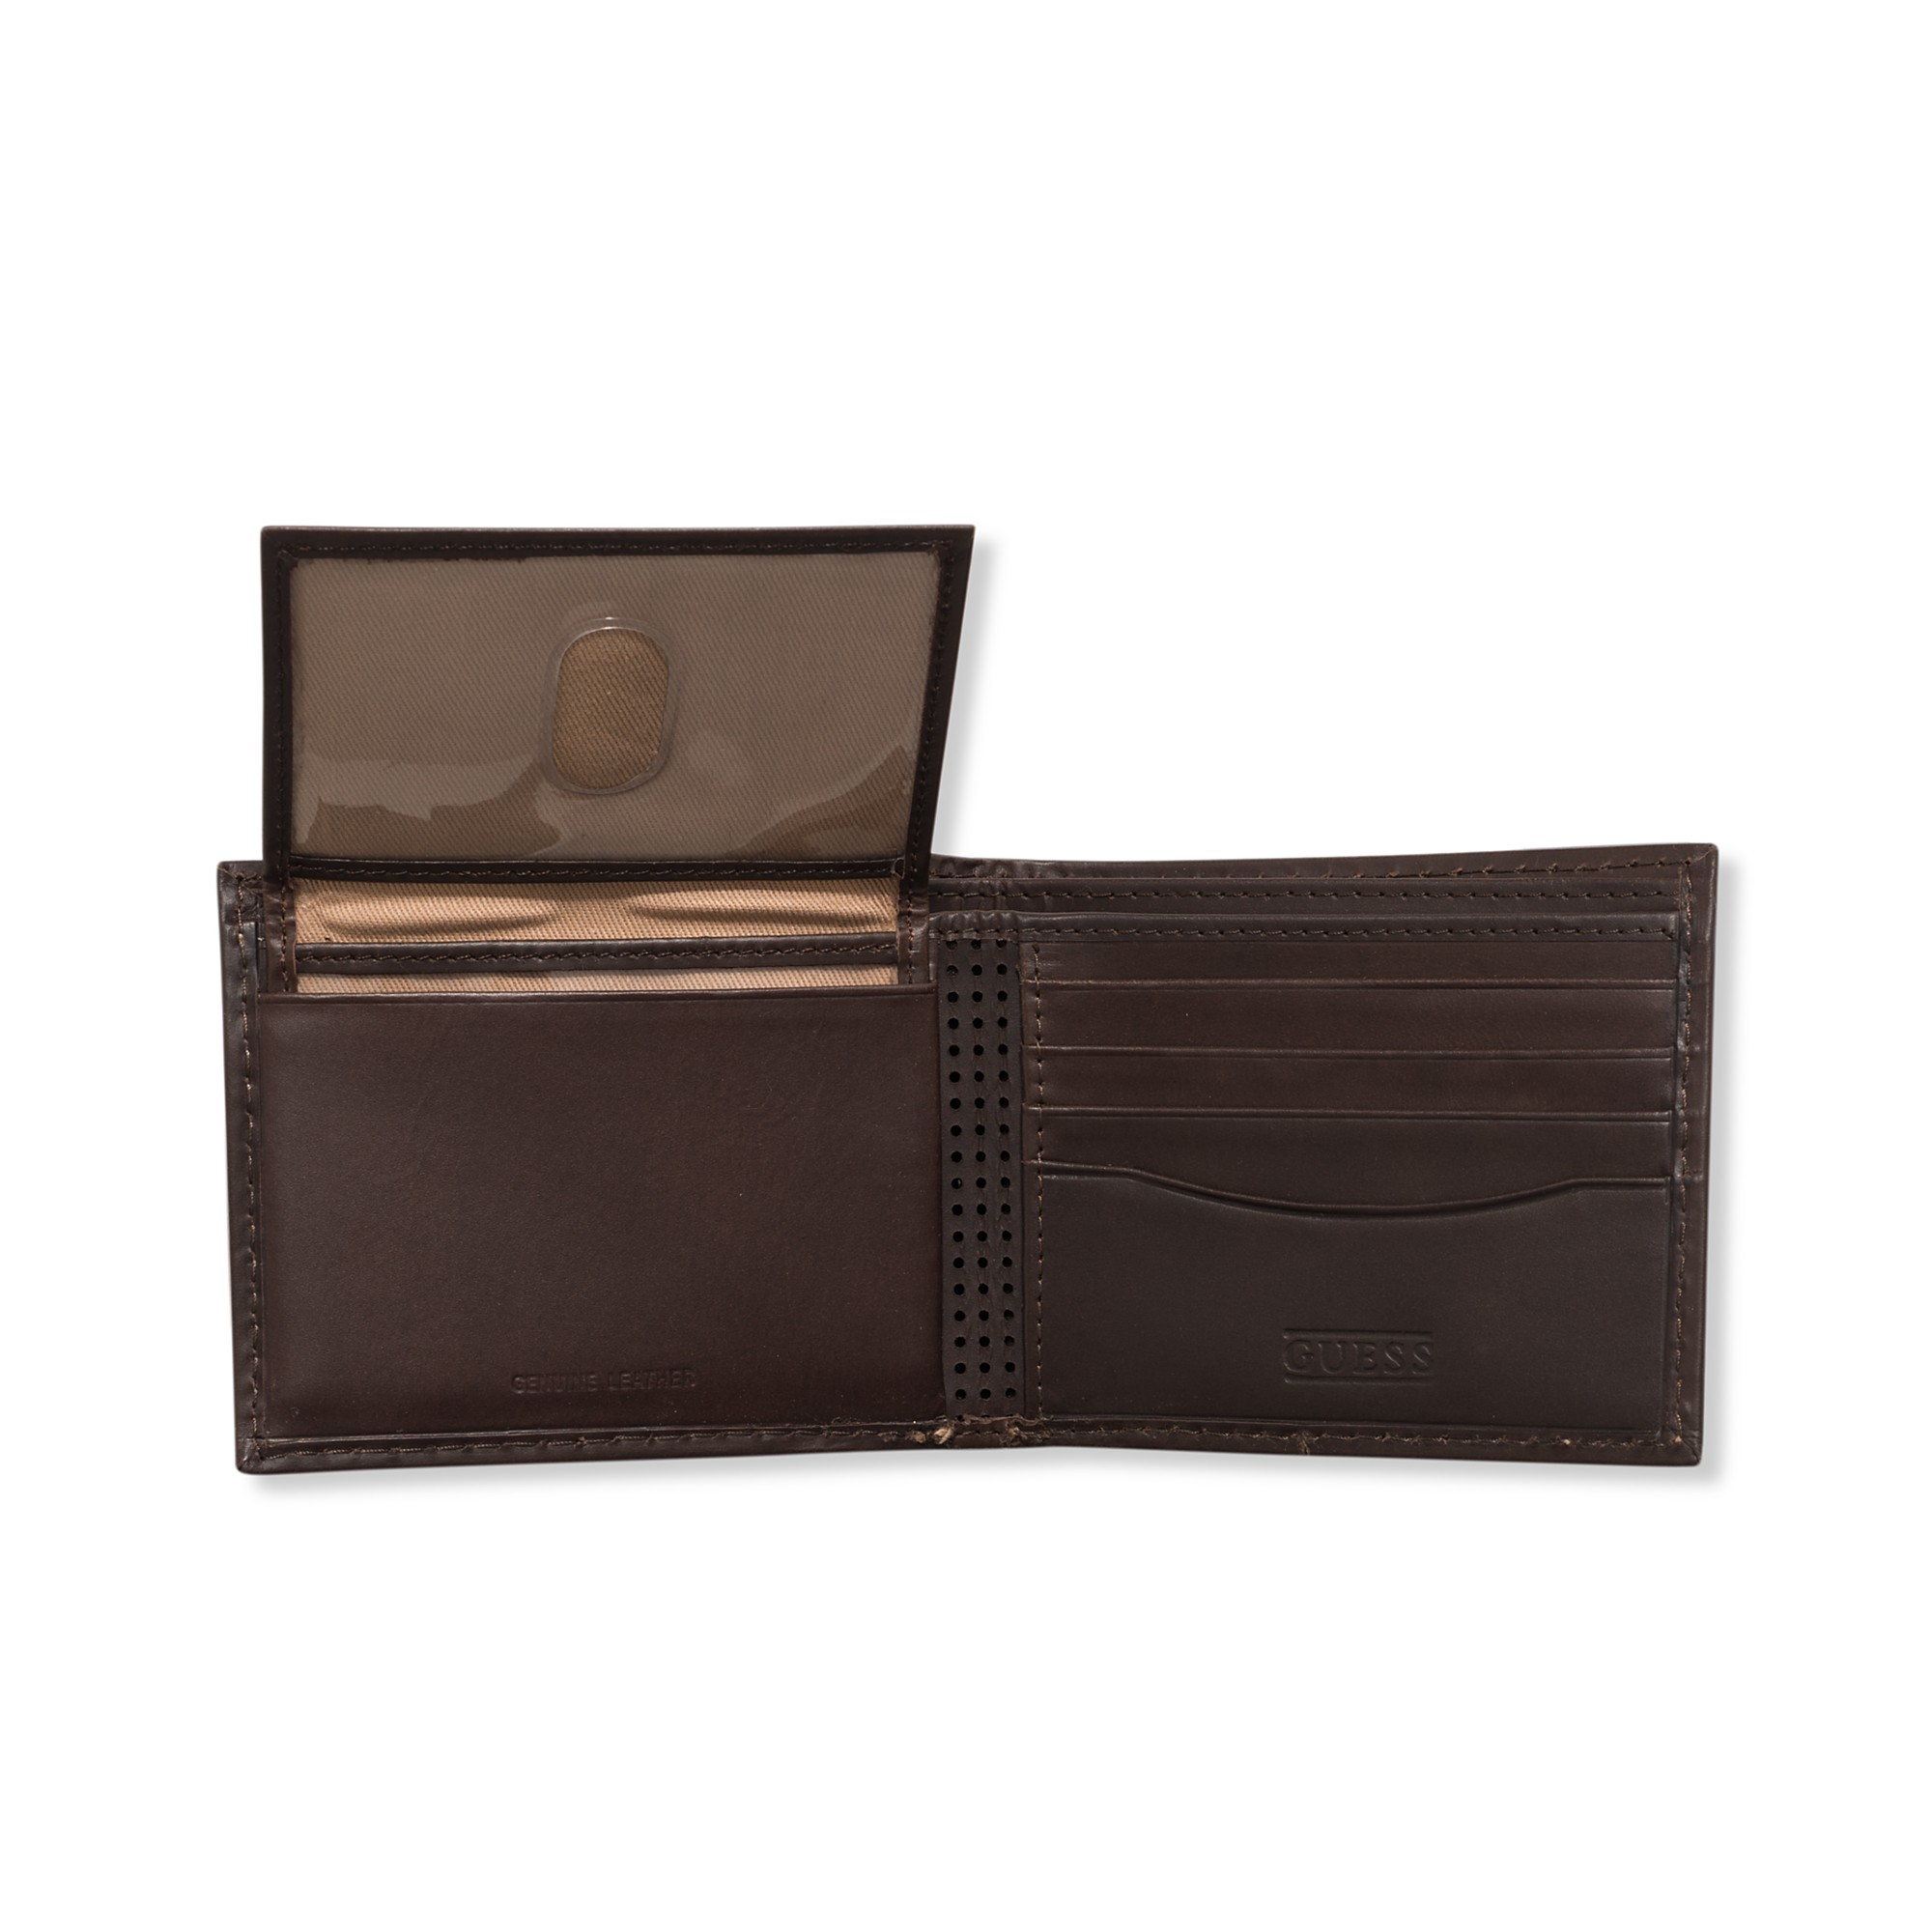 Lyst - Guess Guess Wallets Sunrise Passcase Billfold Wallet in Brown ...